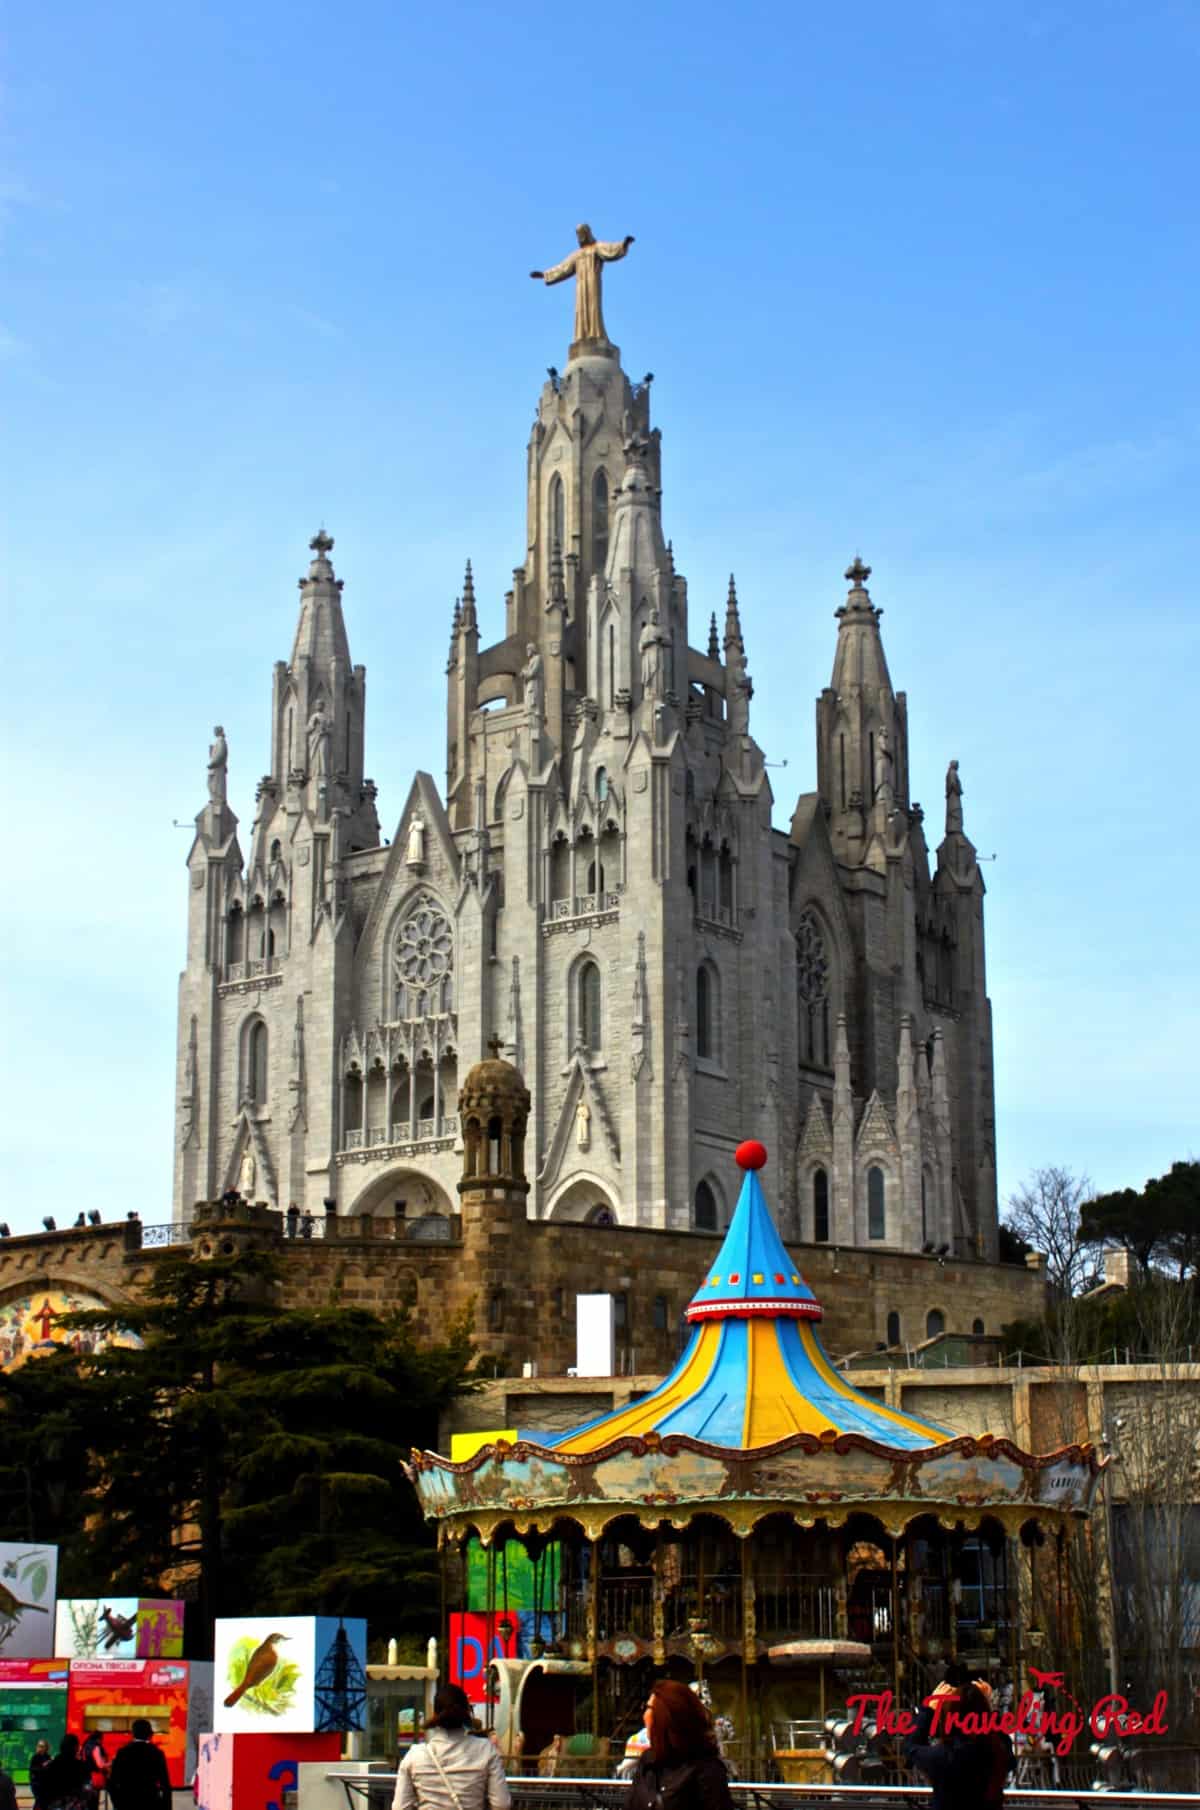 The Sagrat Cor overlooking the Tibidabo Amusement Park  in Tibidabo. Tibidabo is a mountain with an amusement park and church on the summit. It is the highest point in the city with incredible sweeping views of Barcelona Spain.